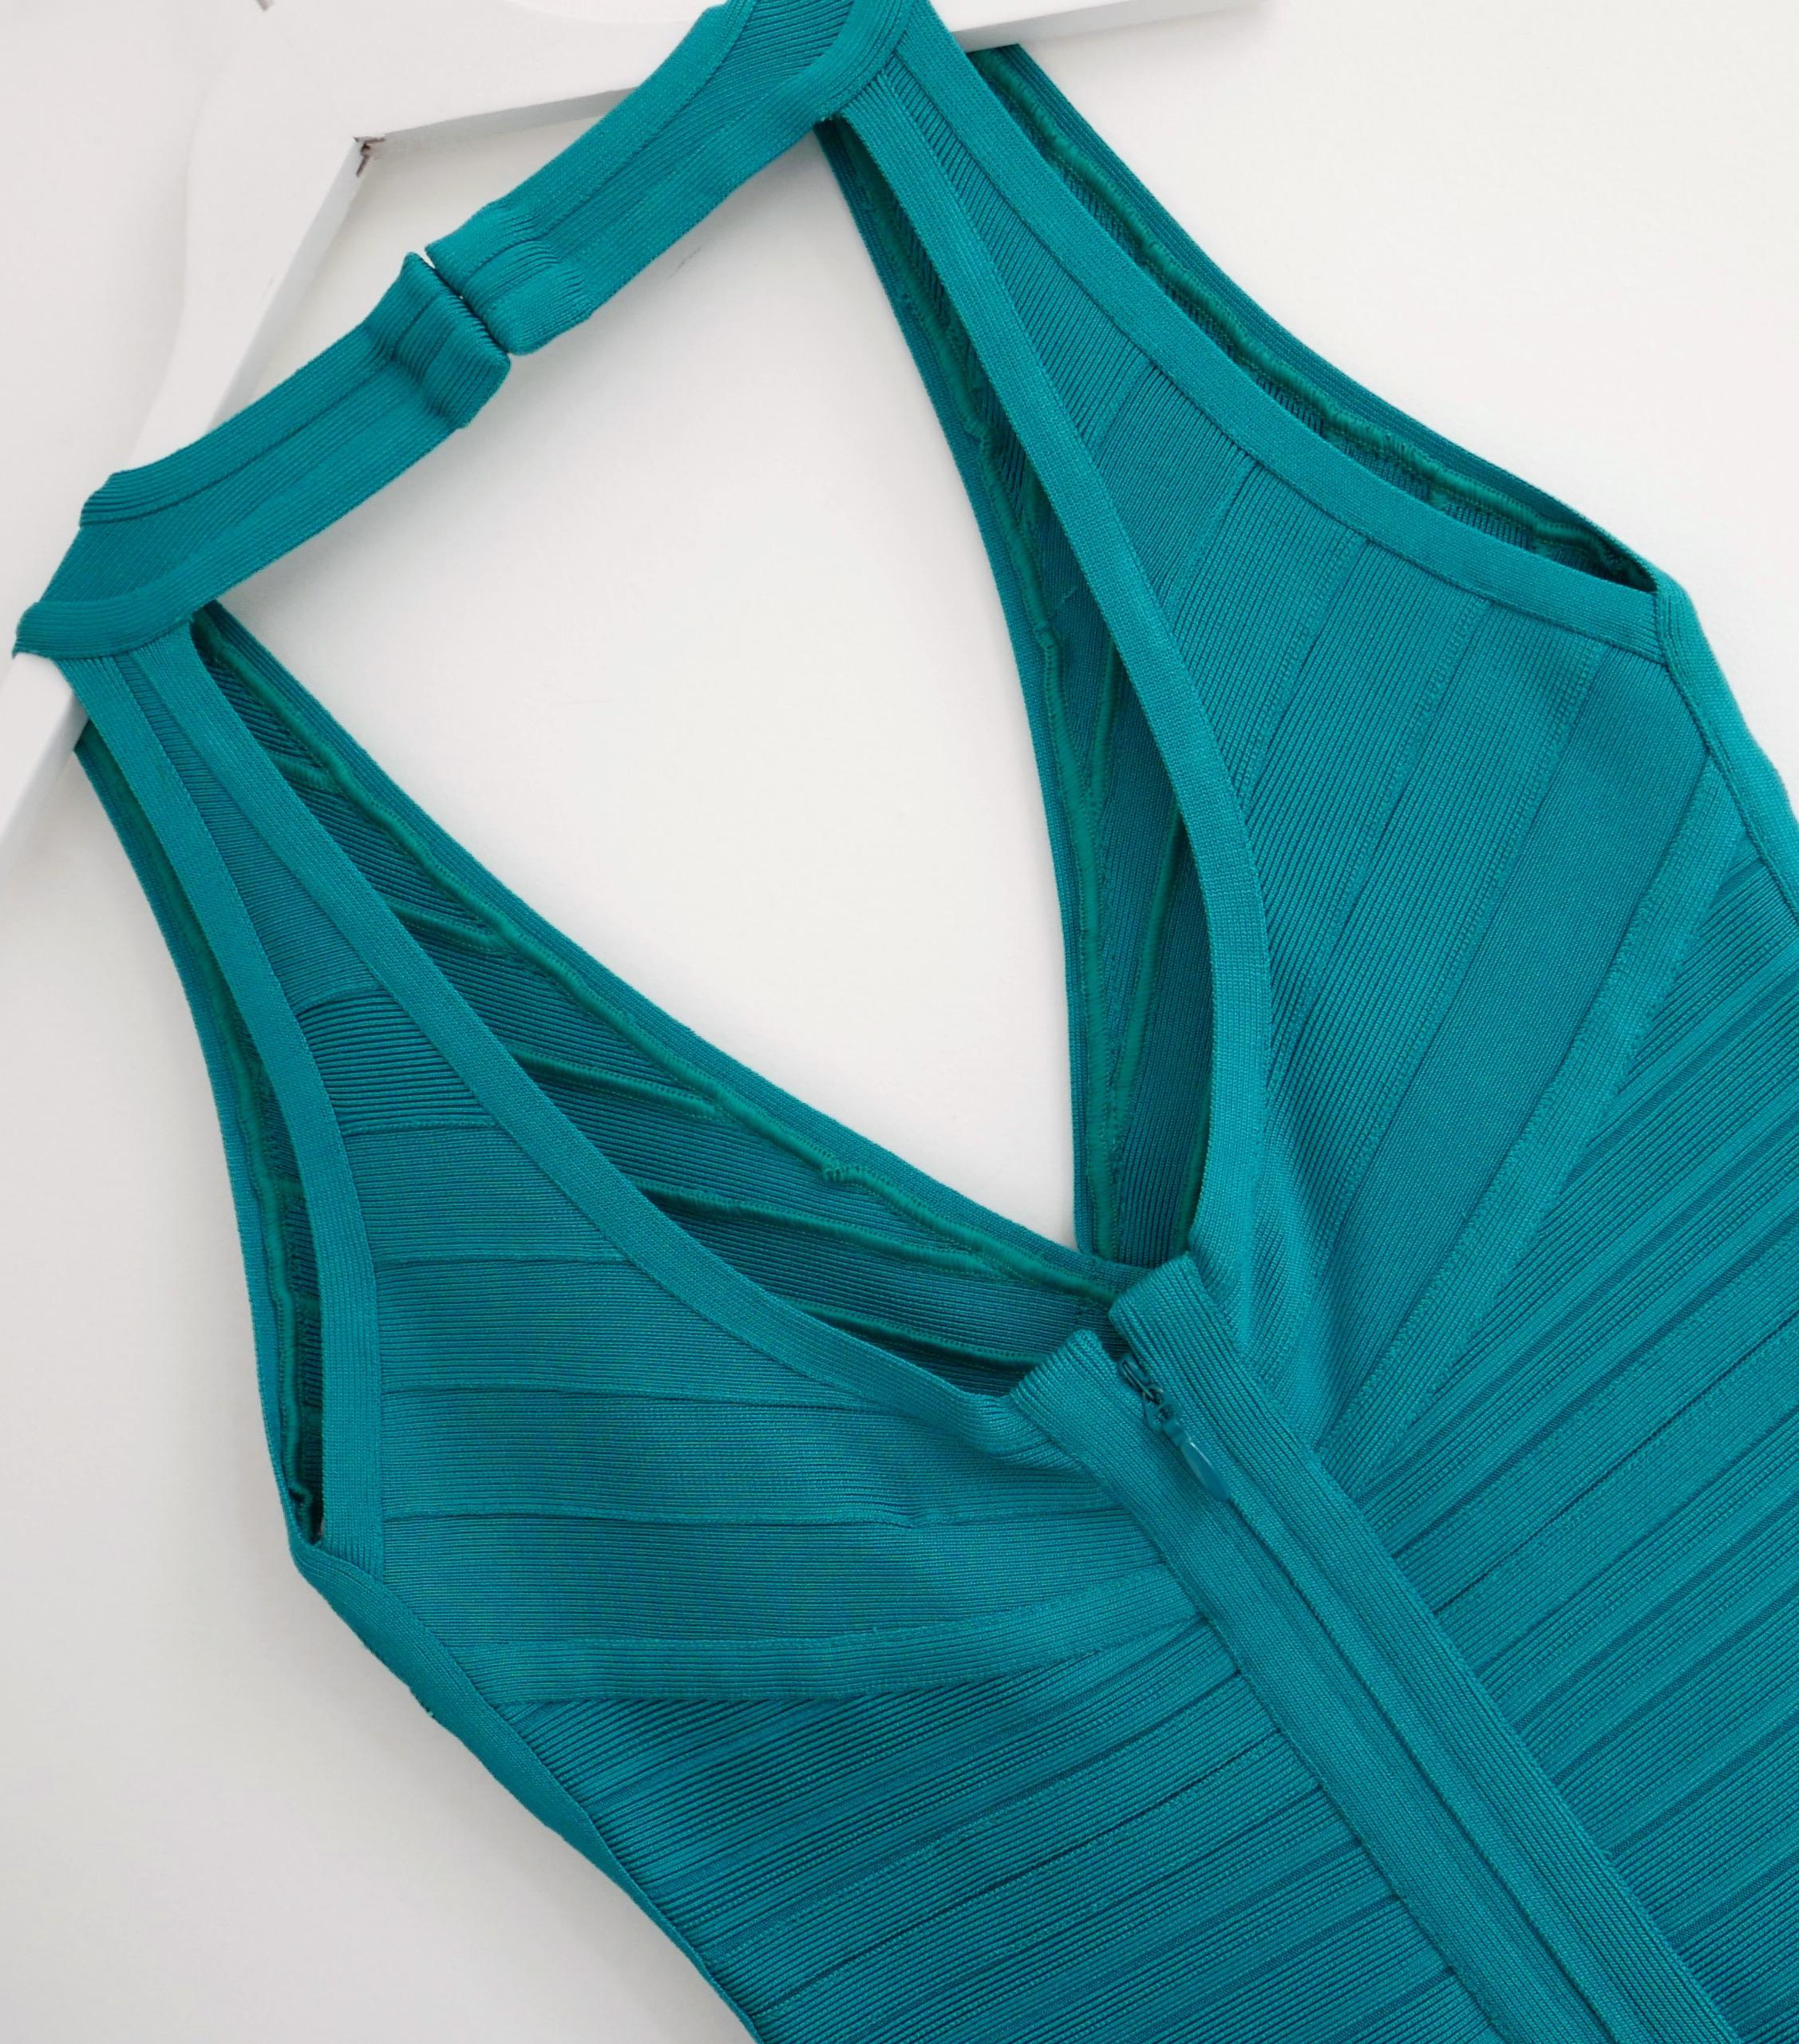 Herve Leger Nadya Bandage Dress Emerald Teal  In New Condition For Sale In London, GB